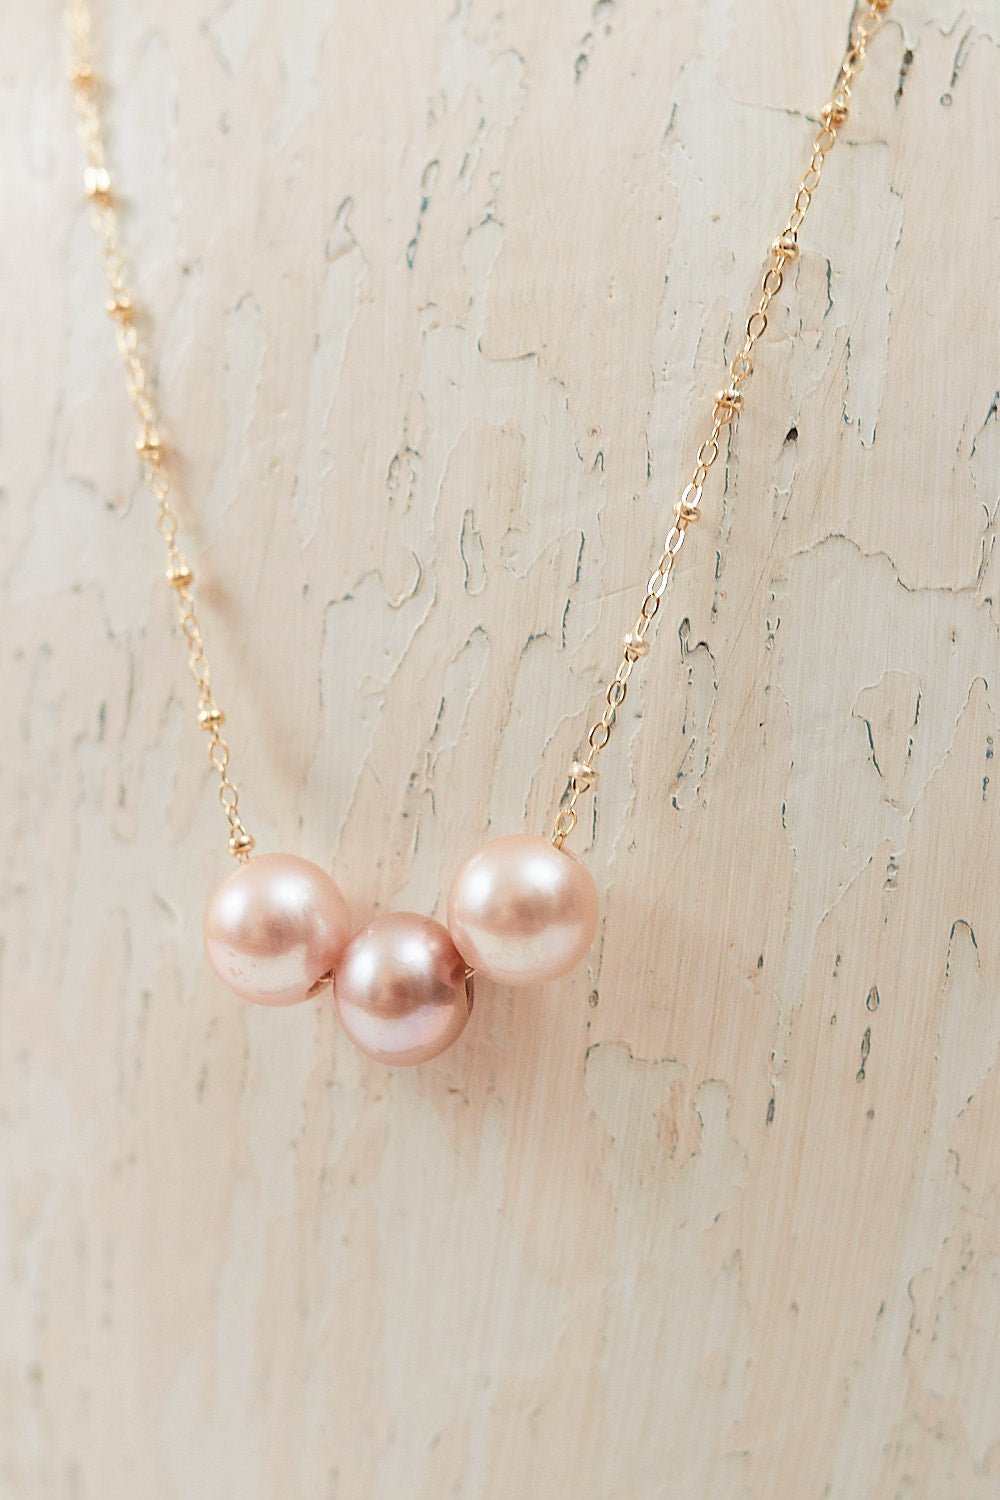 Triple Floating Pearl Necklace - Driftwood Maui & Home By Driftwood